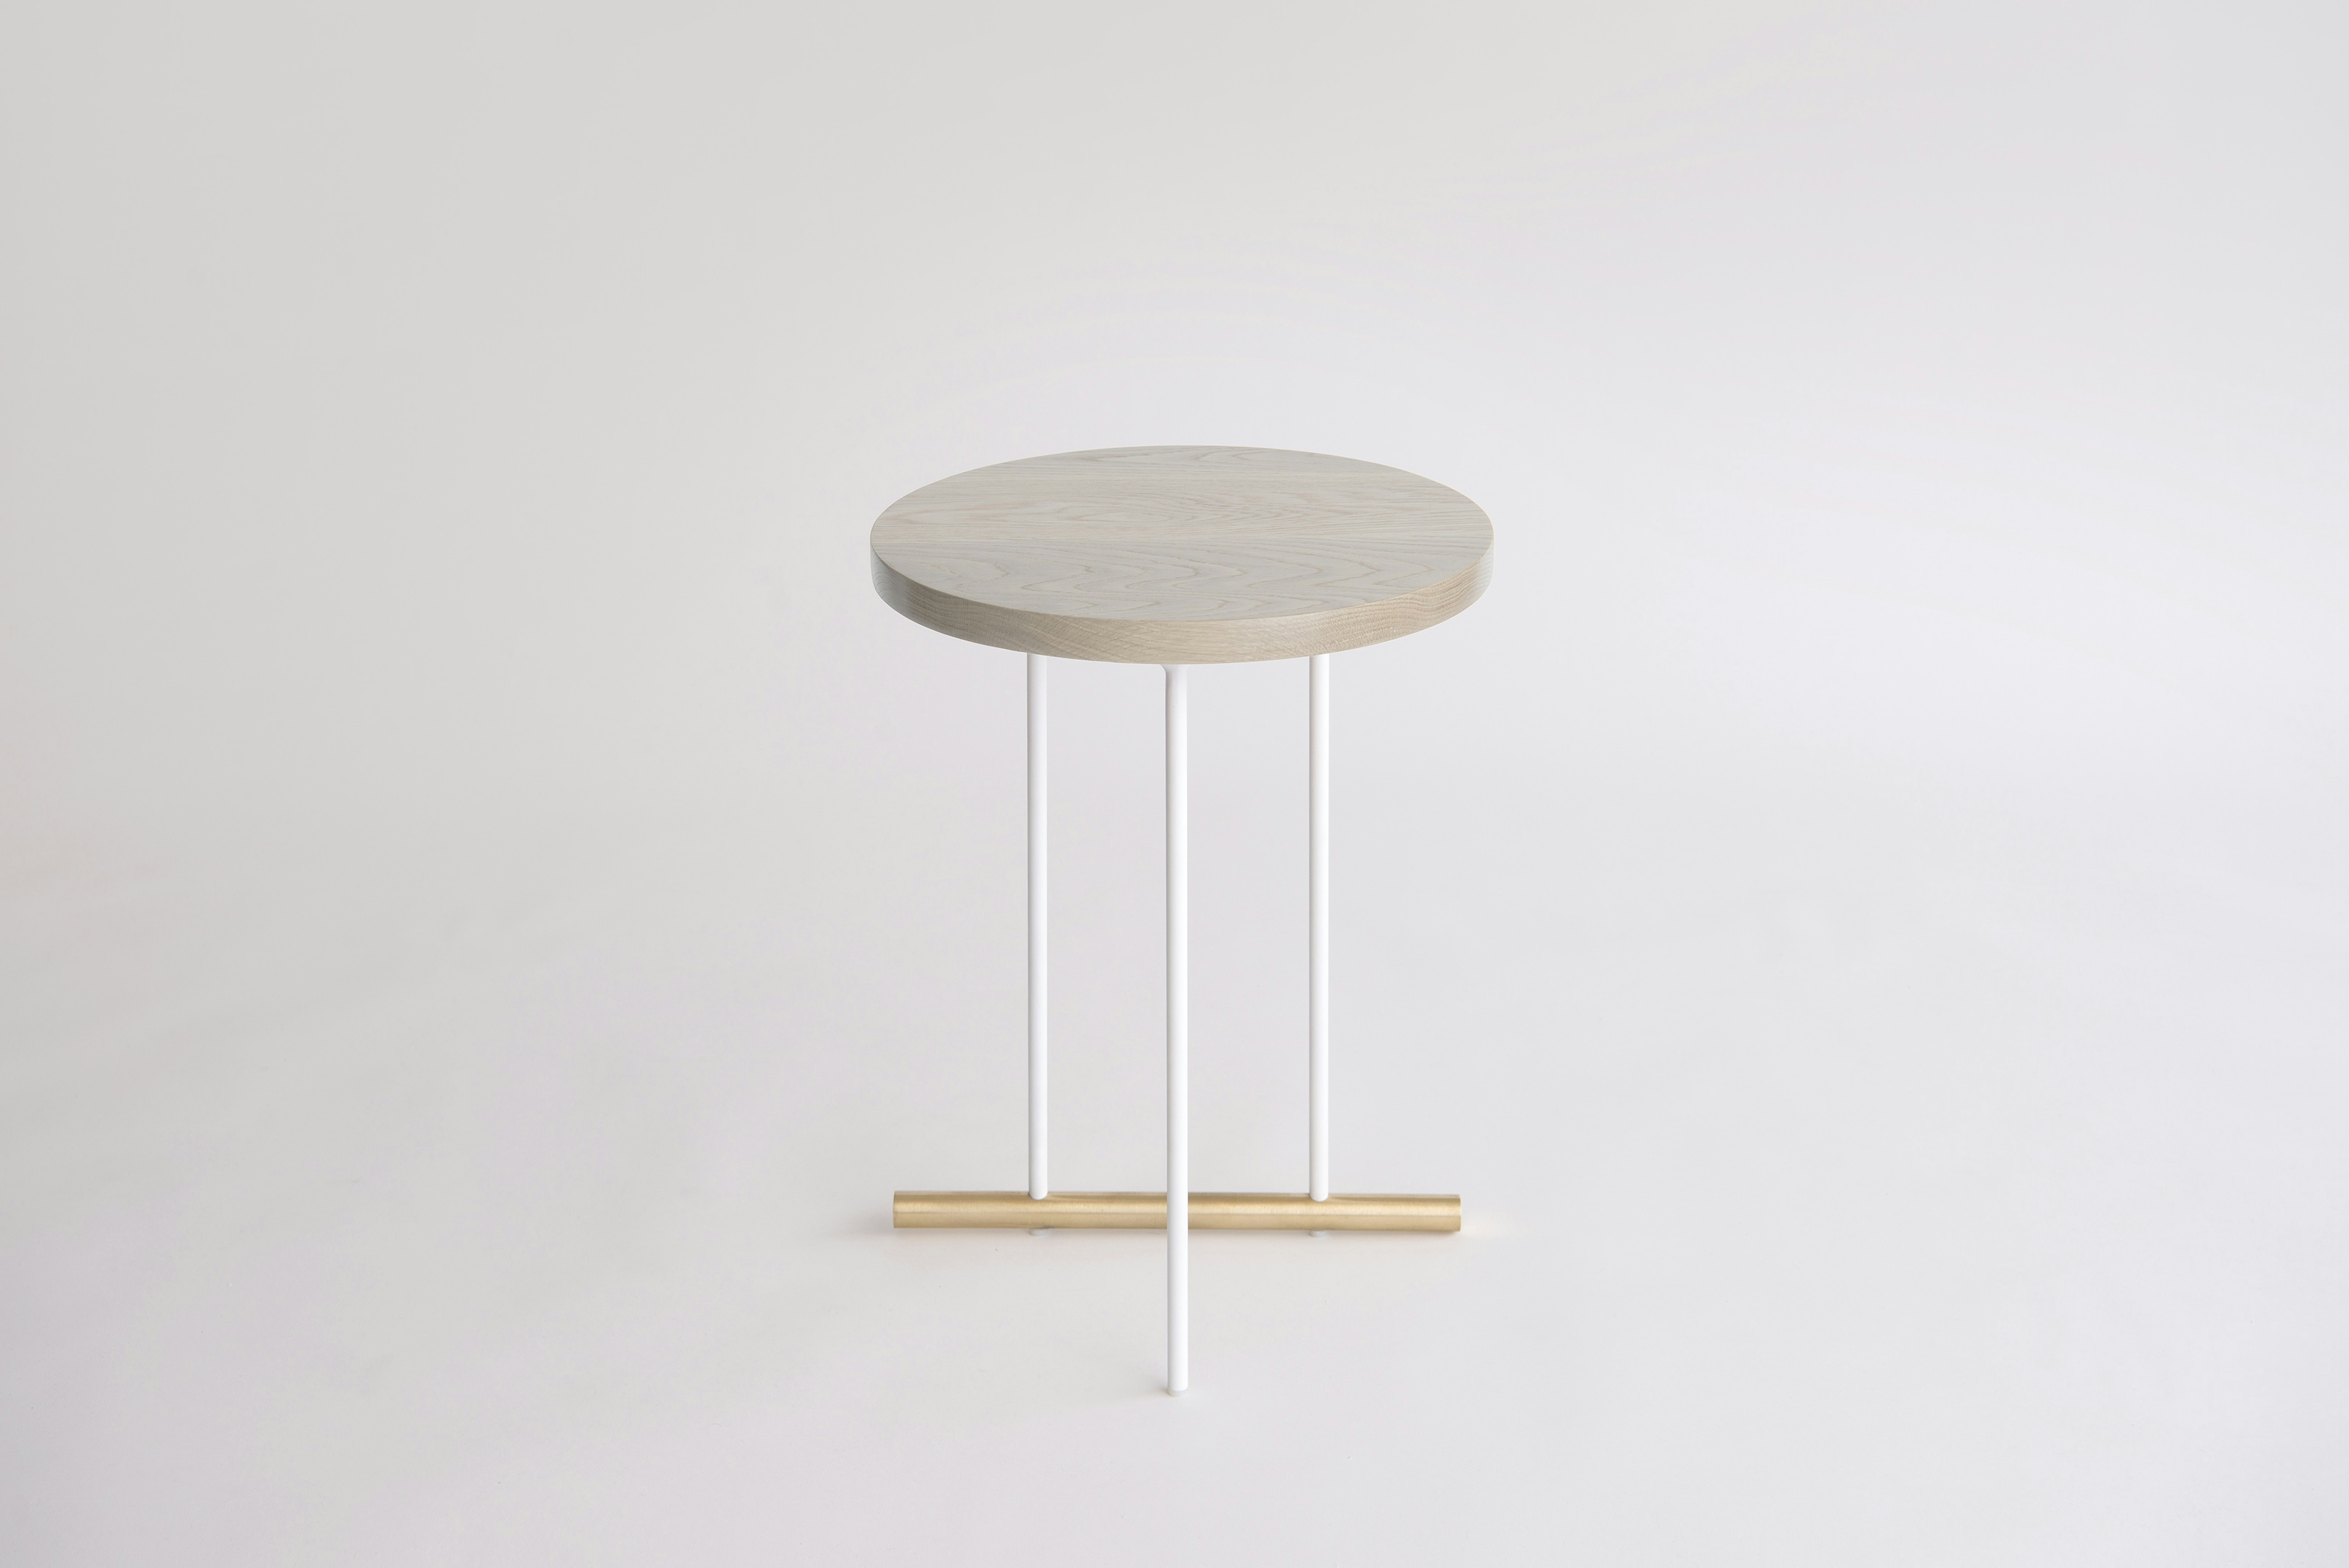 Phase Design Reza Feiz Icon Side Table 1 Product Page Web